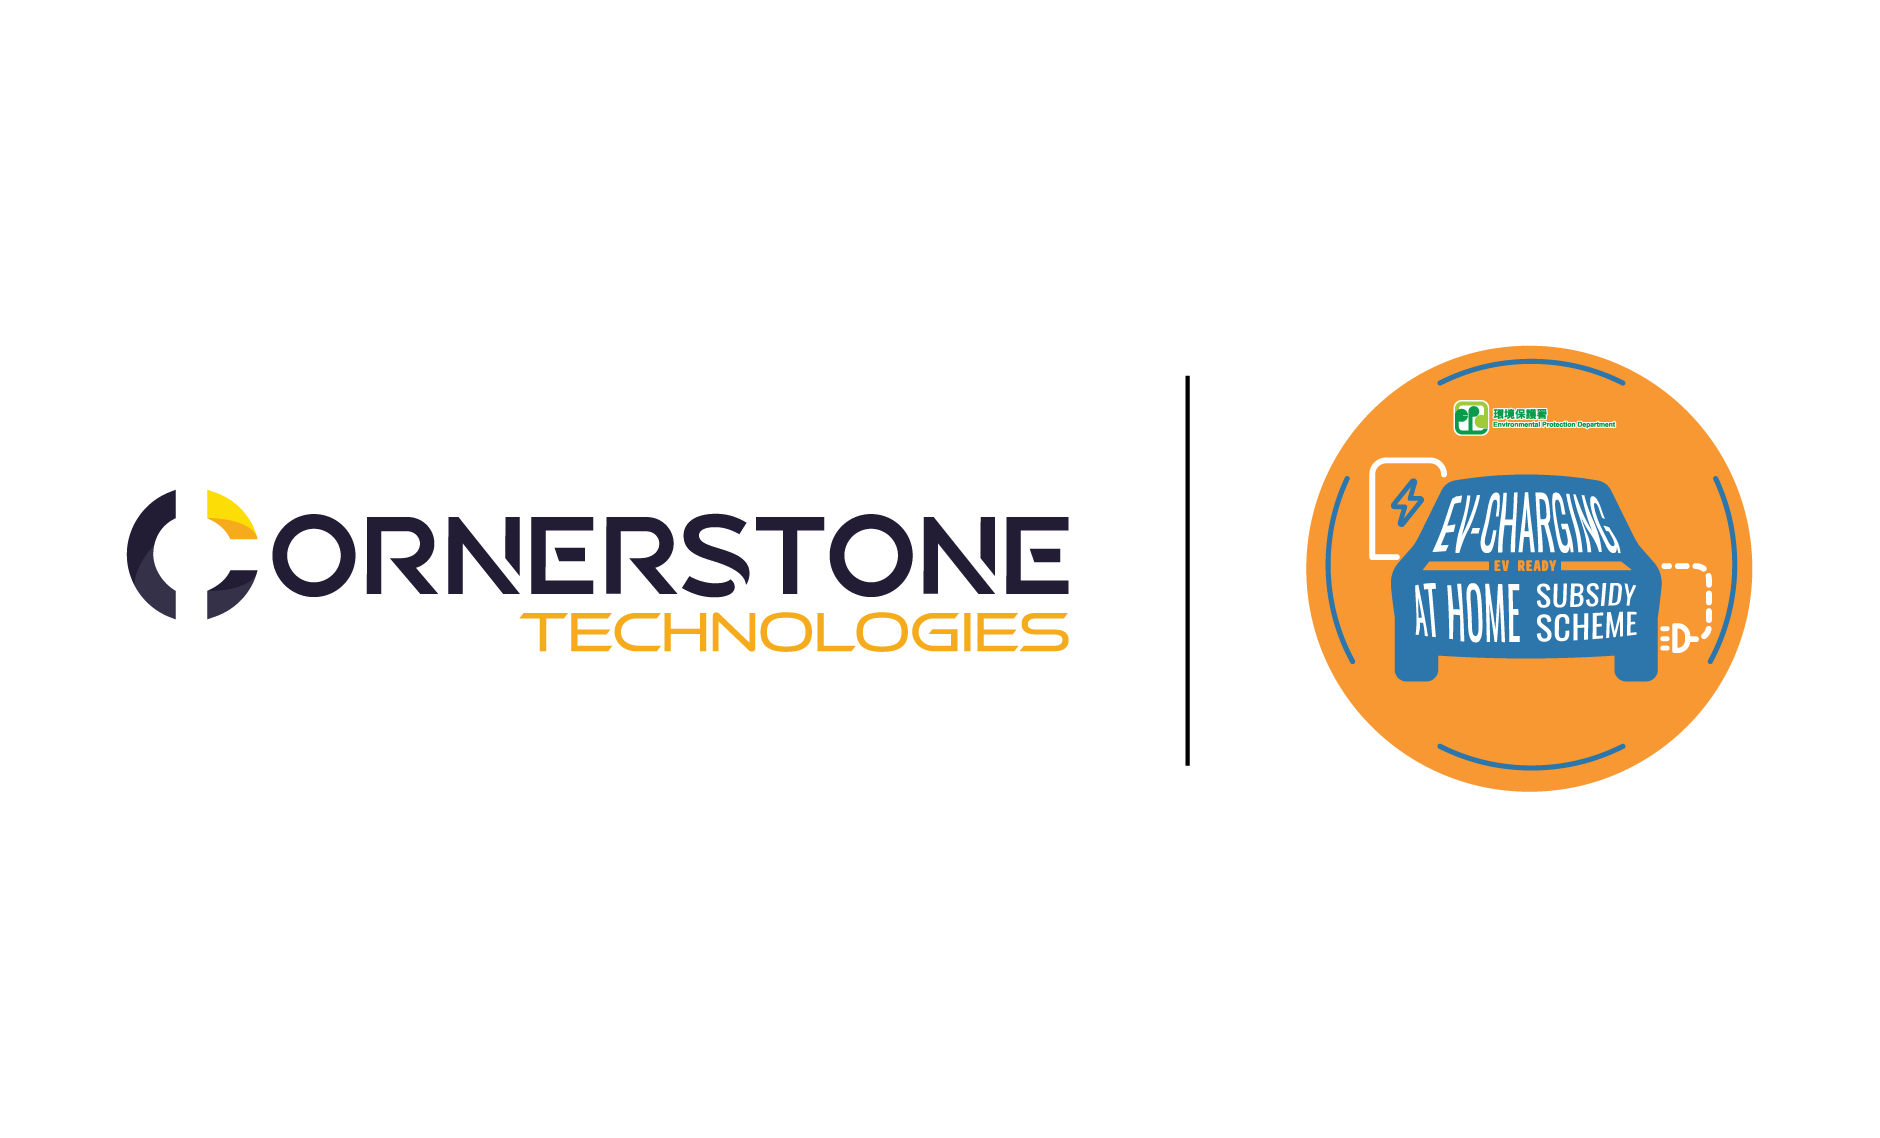 Cornerstone Technologies awarded the 1st EV-charging at Home Subsidy Scheme (EHSS)